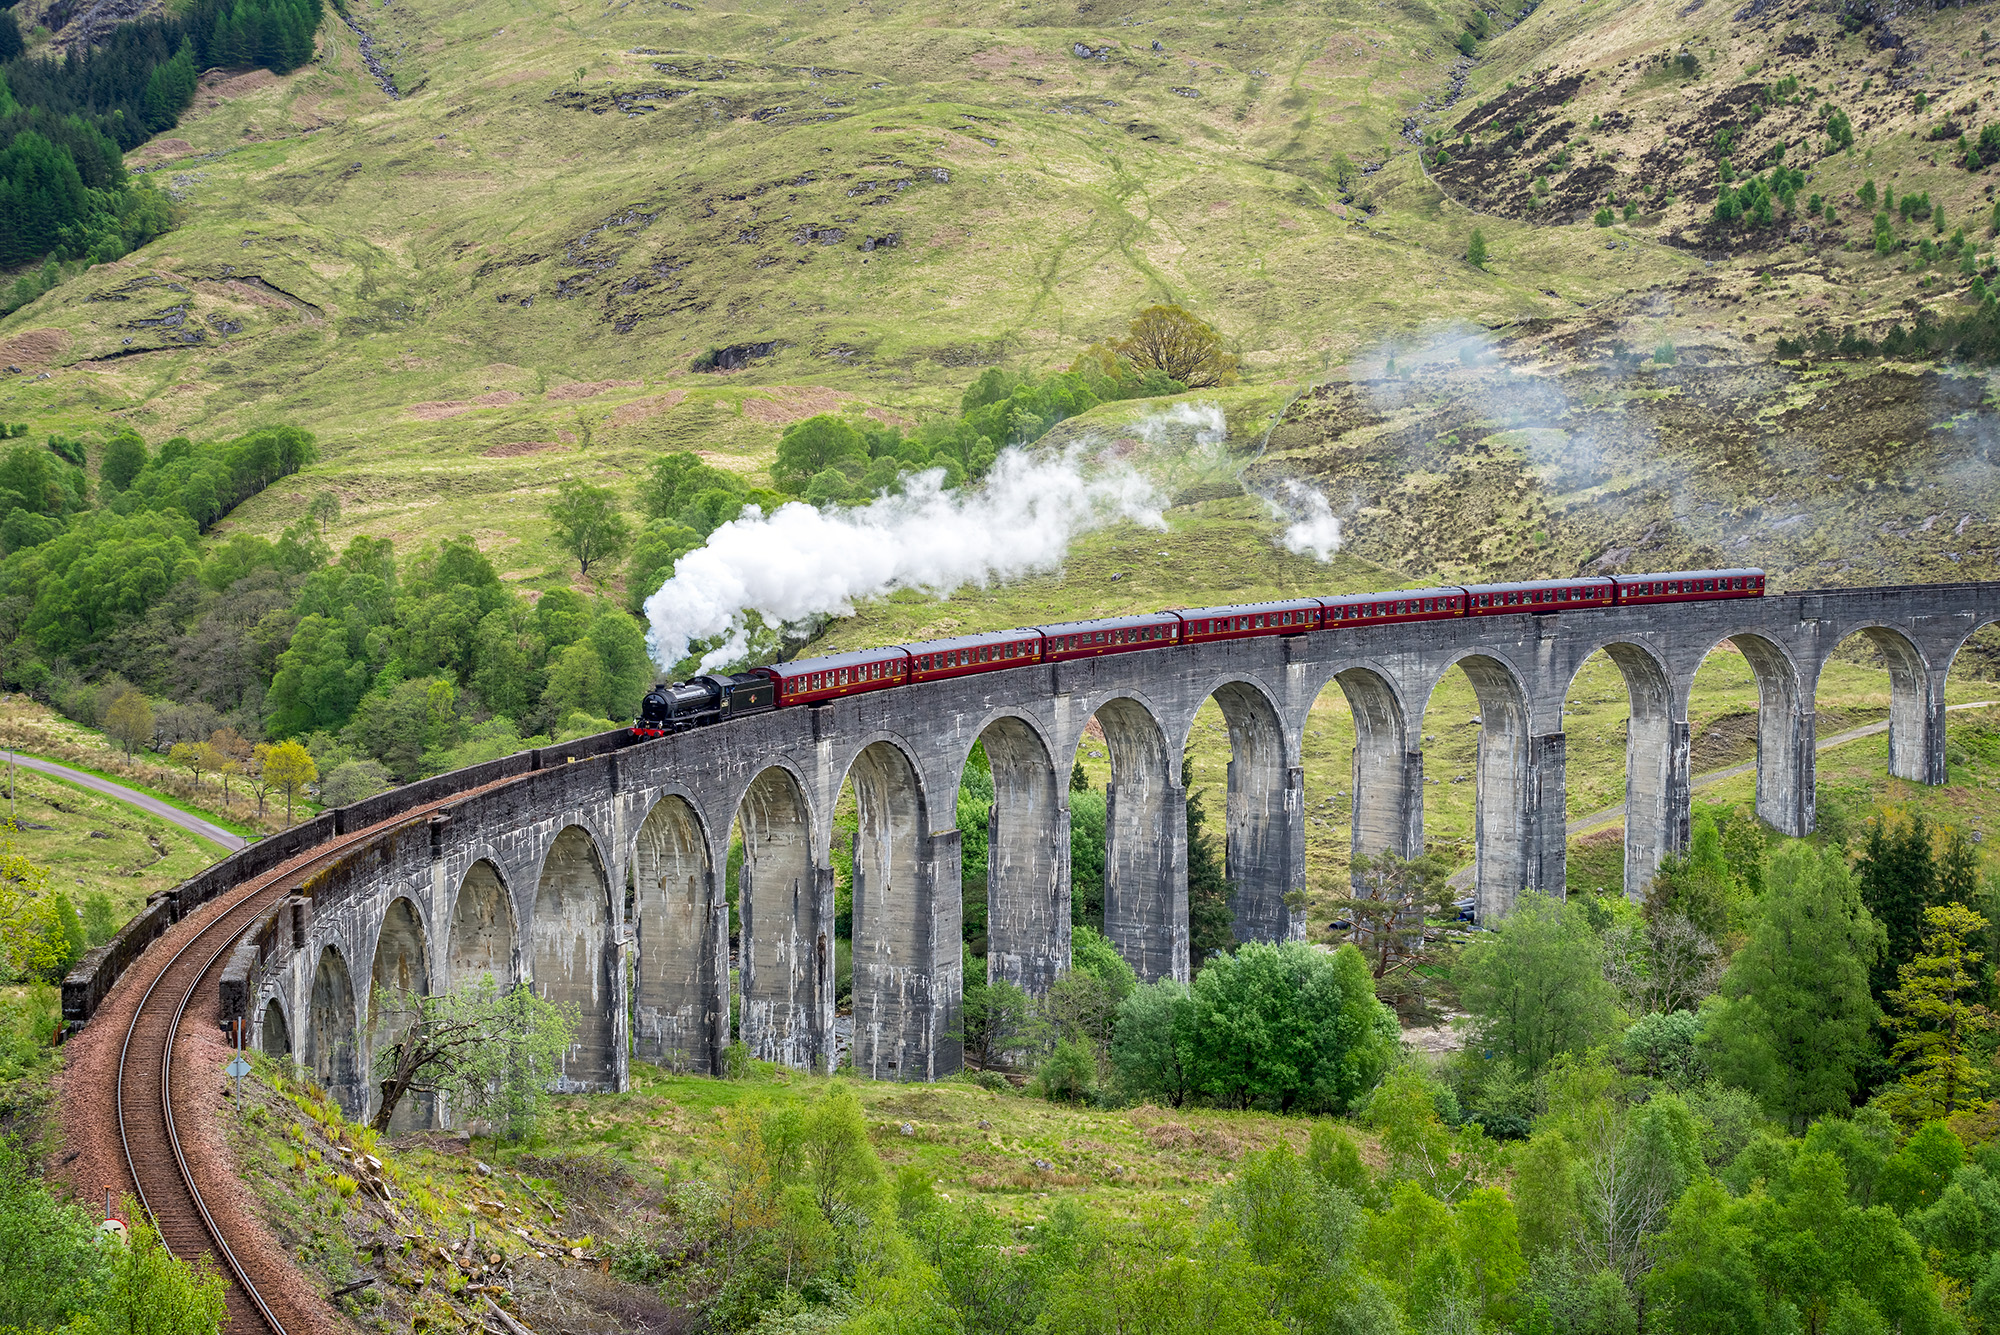 "Steam Journey Across Glenfinnan Viaduct" showcases the iconic Glenfinnan Viaduct in Scotland. This remarkable structure, often...